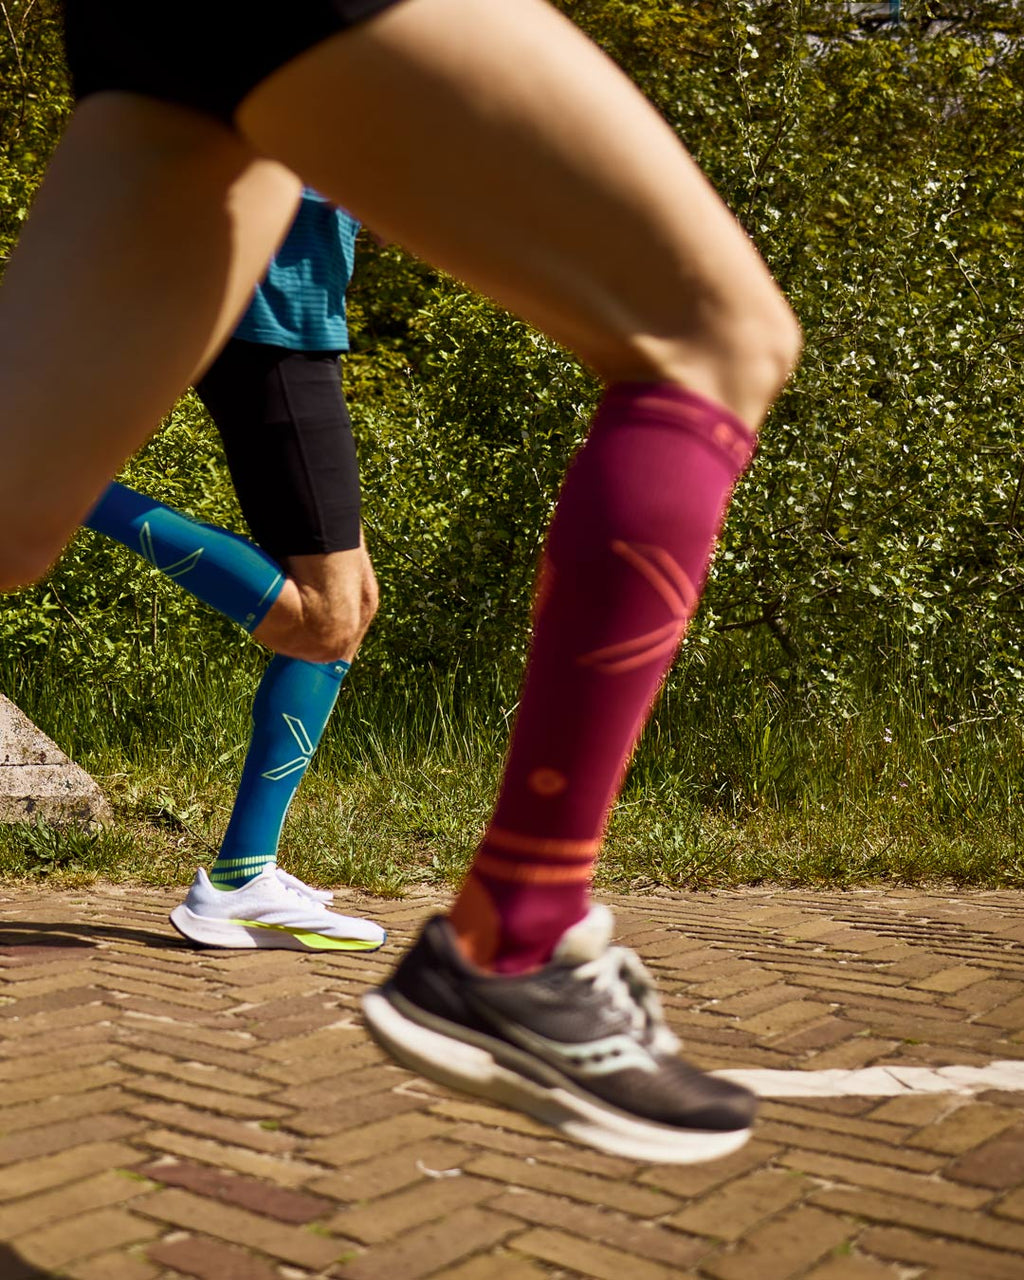 7 Shin Splint Stretches for Recovery and Prevention